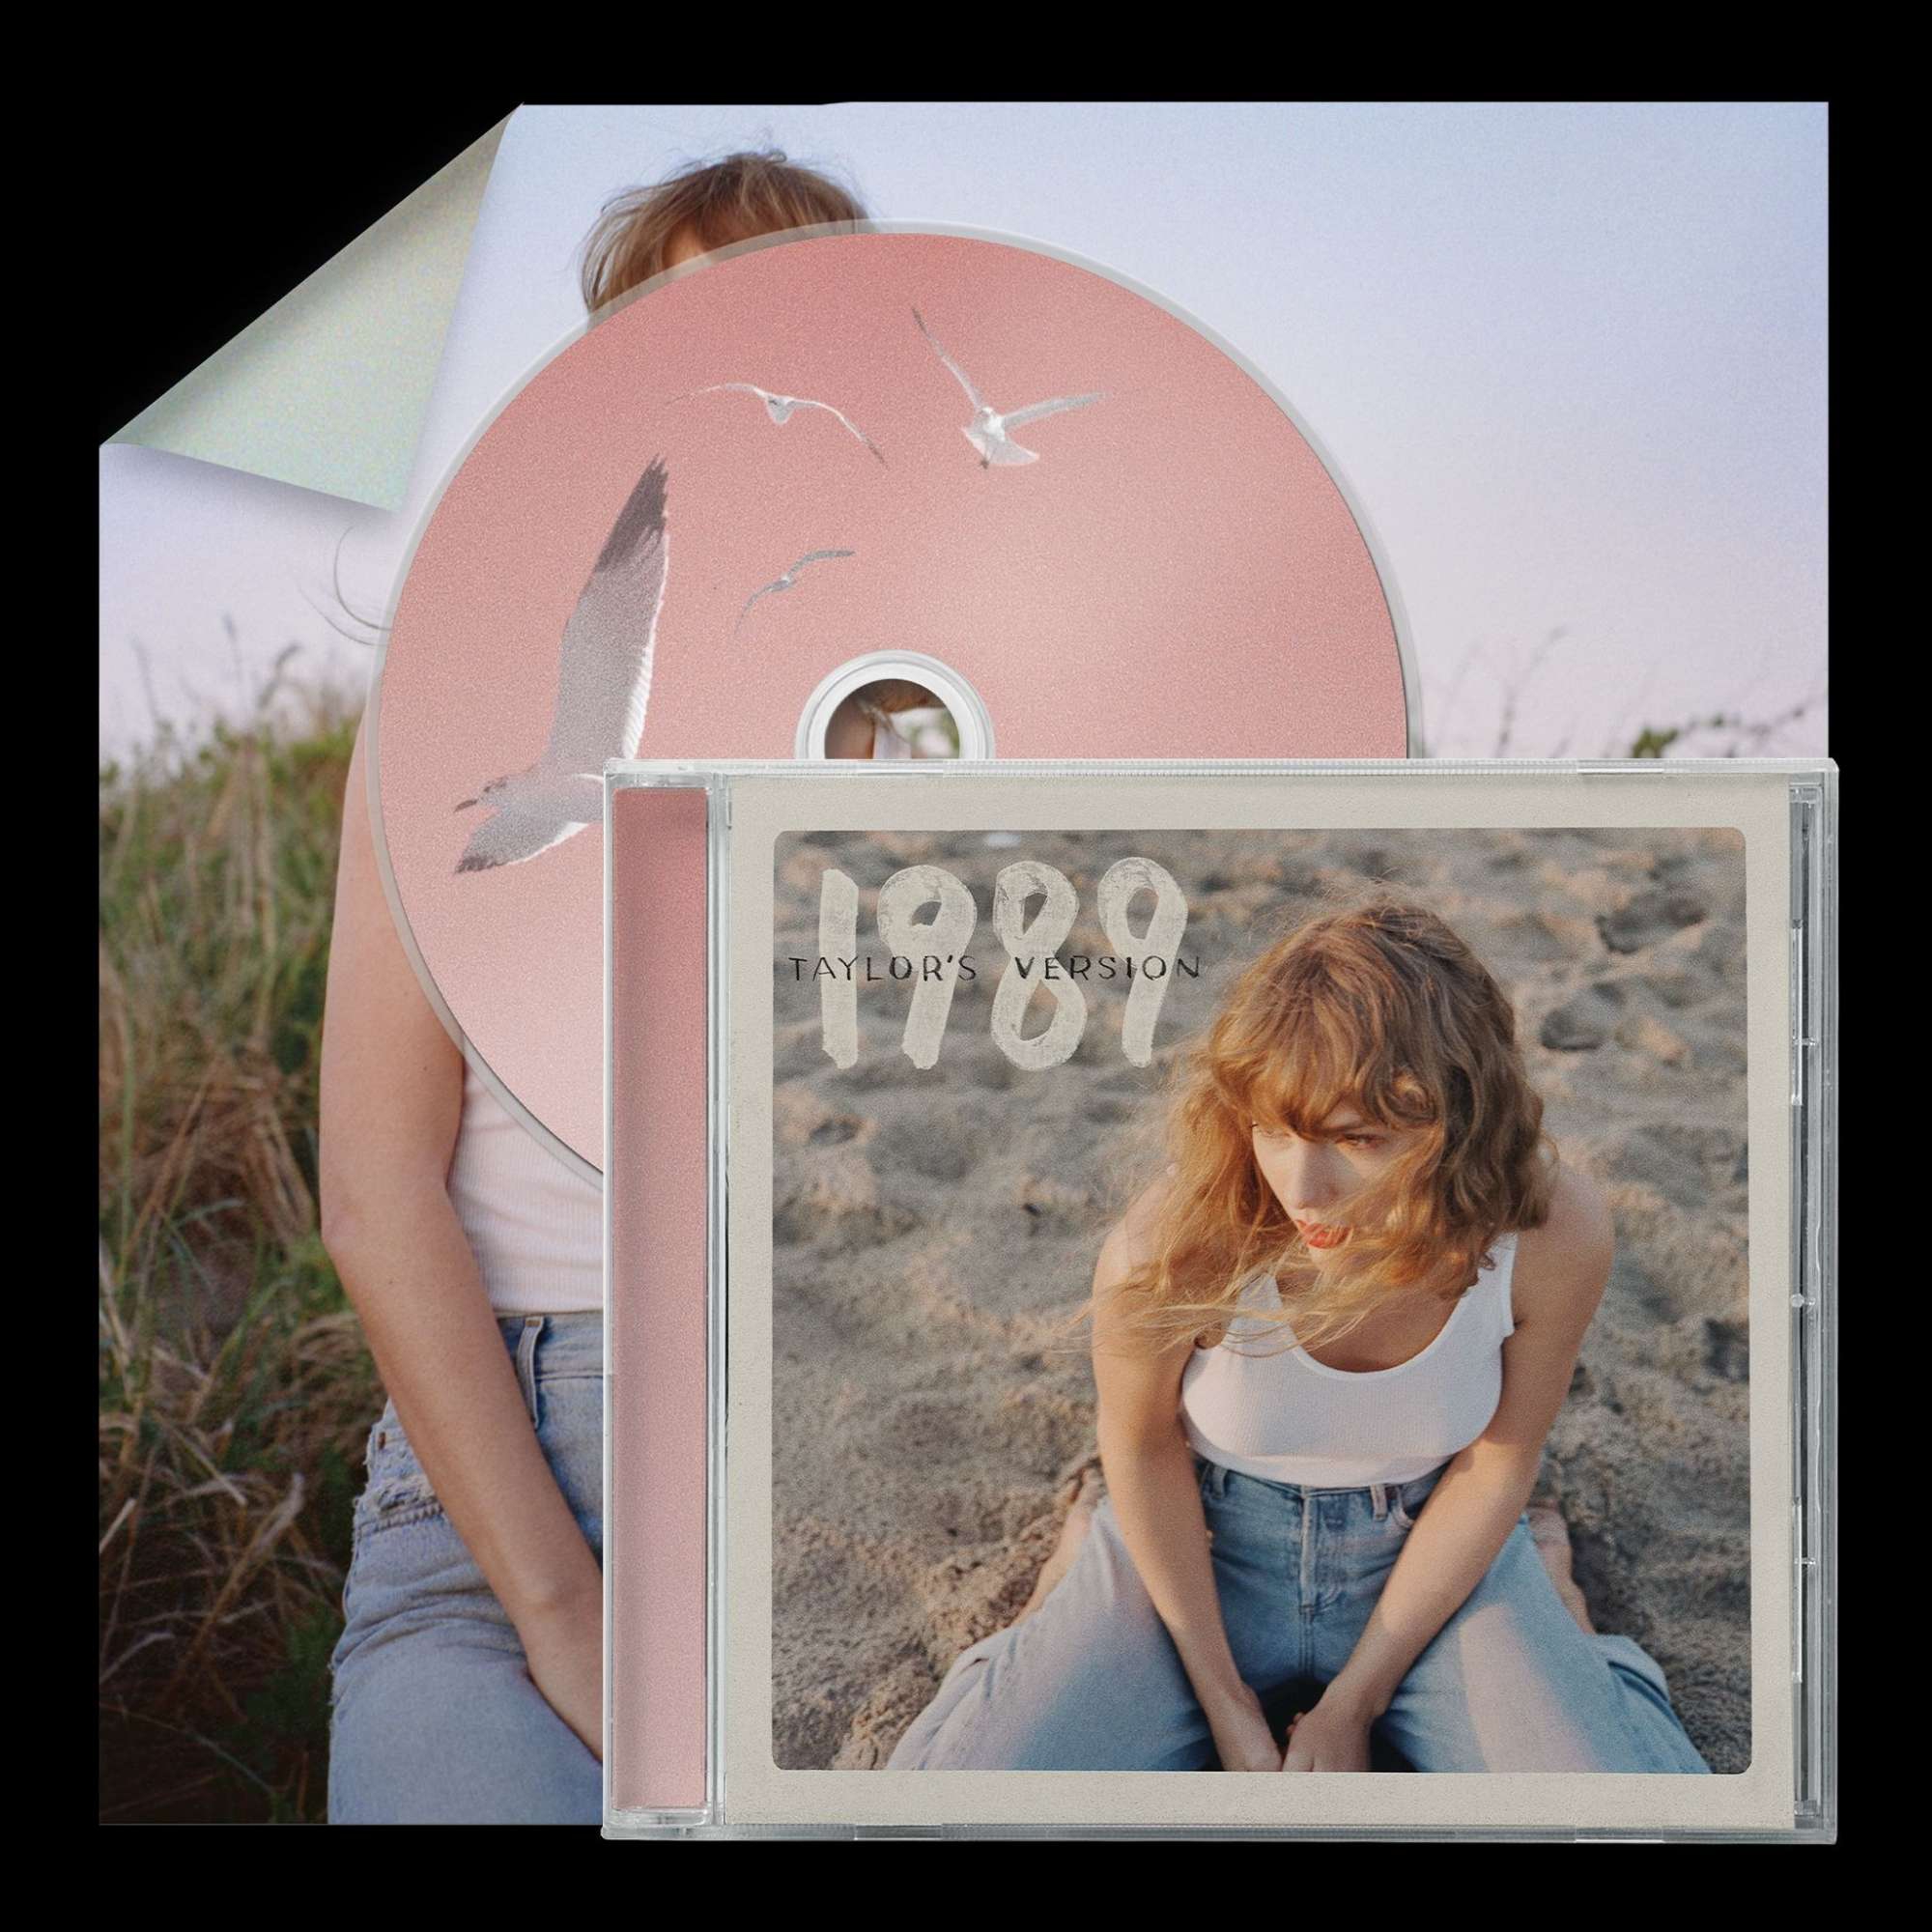 Taylor Swift - 1989 (Taylor's Version) (Rose Garden Pink Edition)